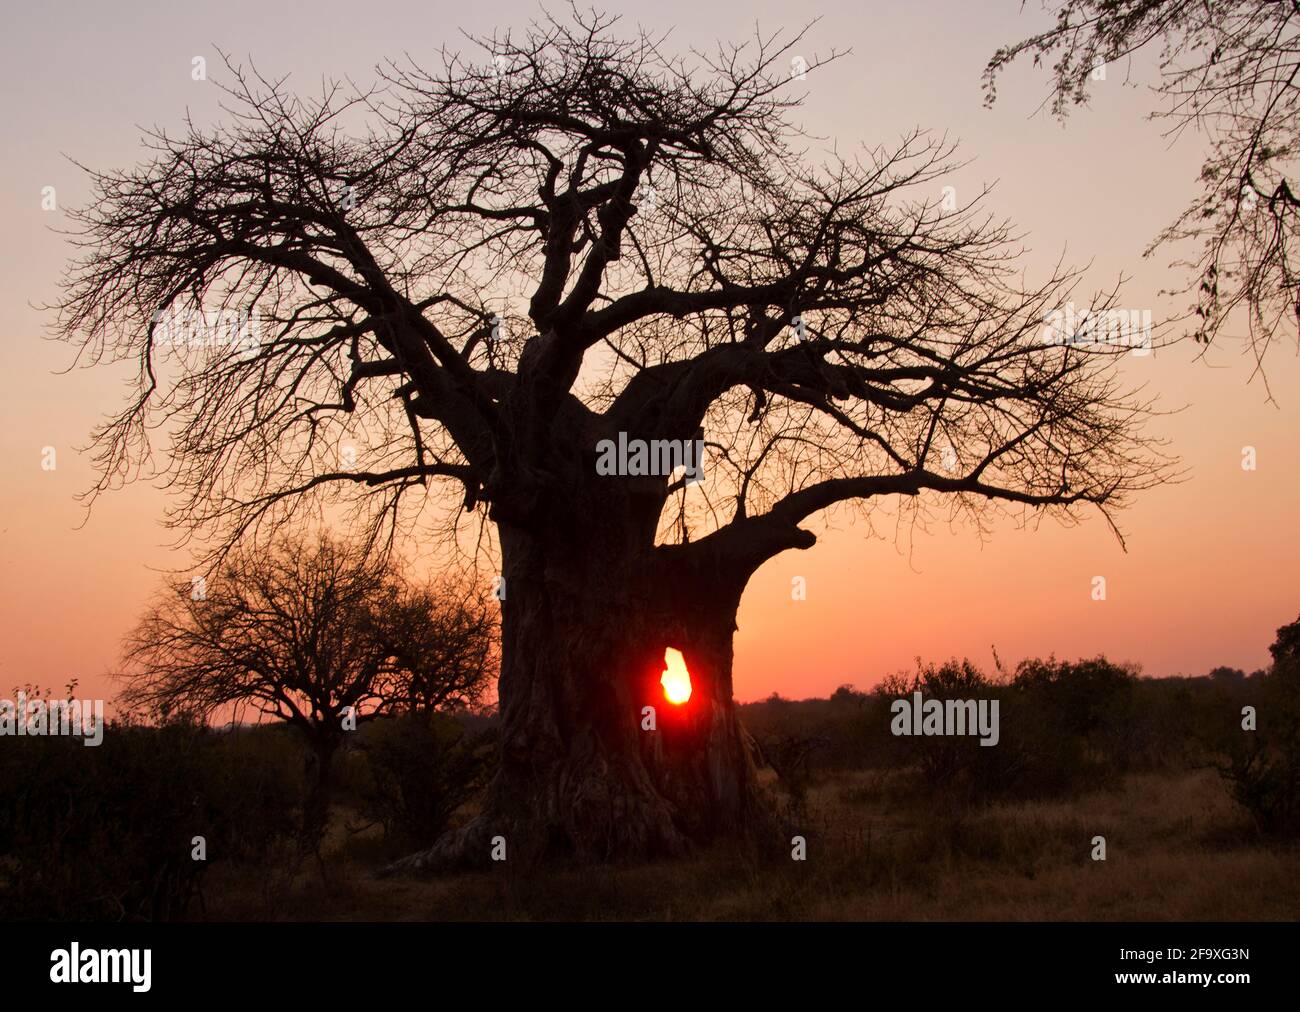 An ancient scarred baobab is silhouetted against a winter sunset. Elephants have gouged a hole in the massive trunk when they seek moisture Stock Photo